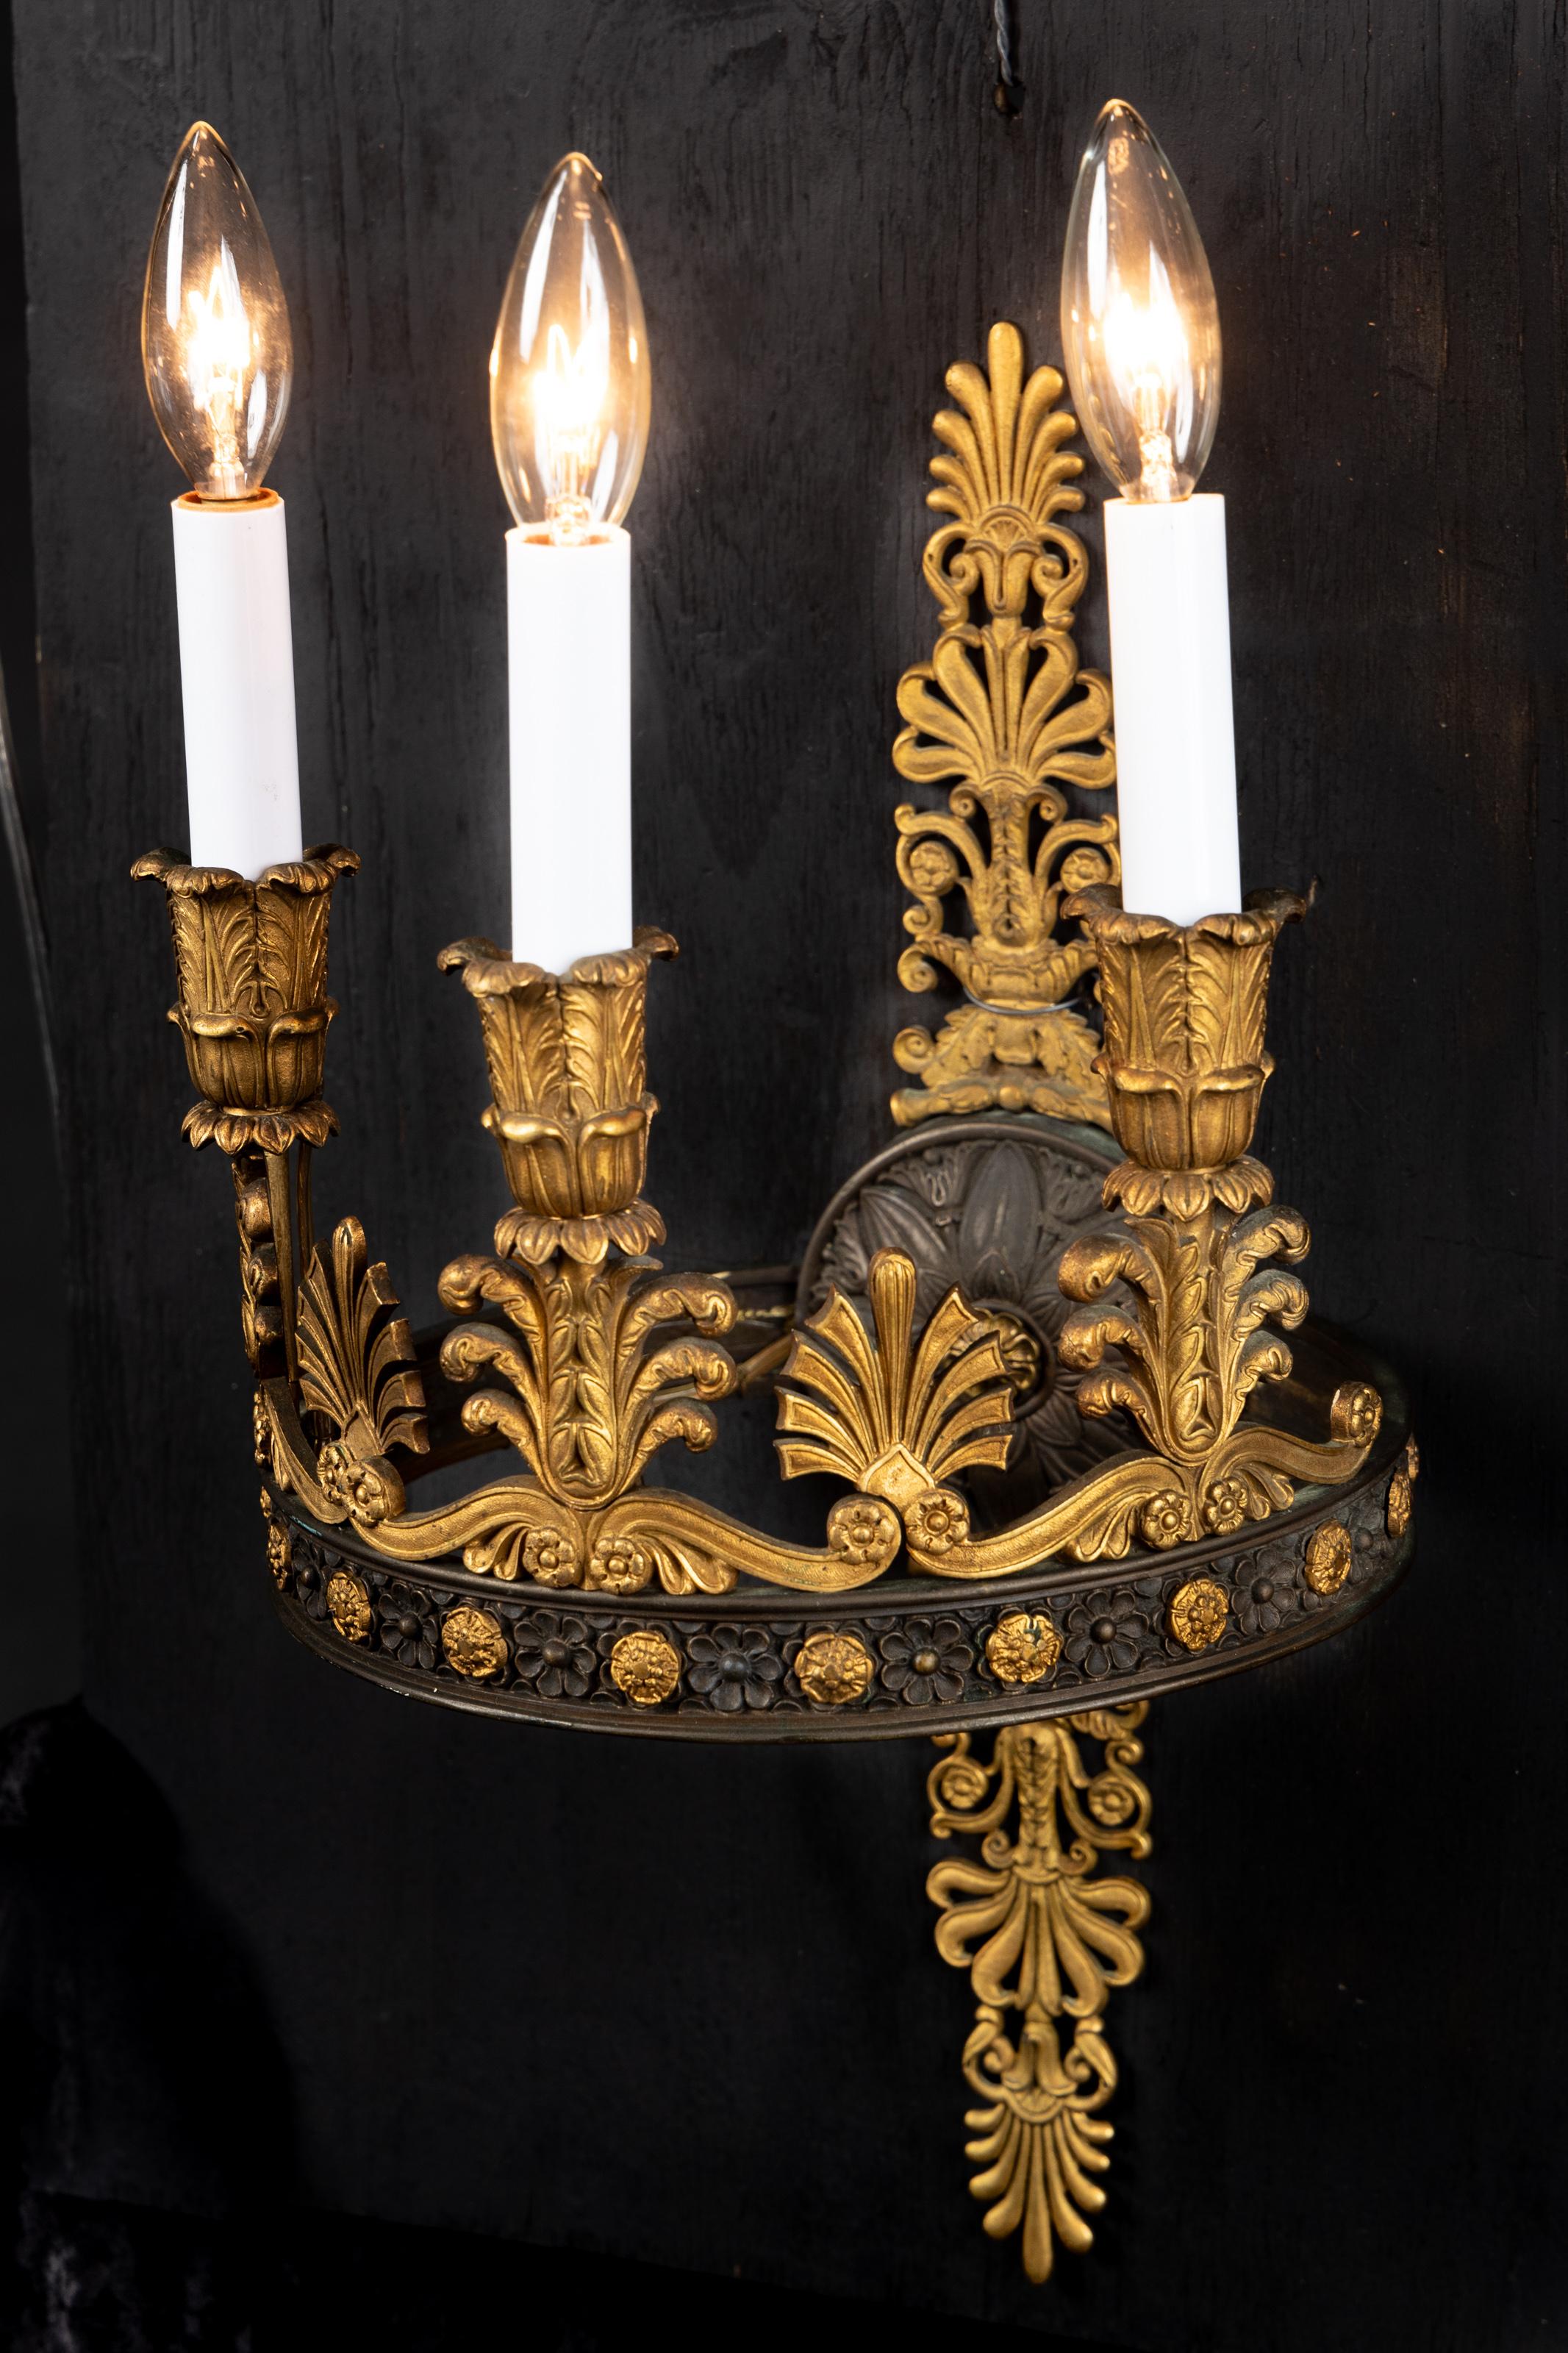 Magnificent pair of French 19th century Period First Empire round patinated bronze and bronze three light sconces with bronze candle cups of acanthus leaves, adorned with feathers, bronze fleurettes on patinated bronze ring, and elaborate